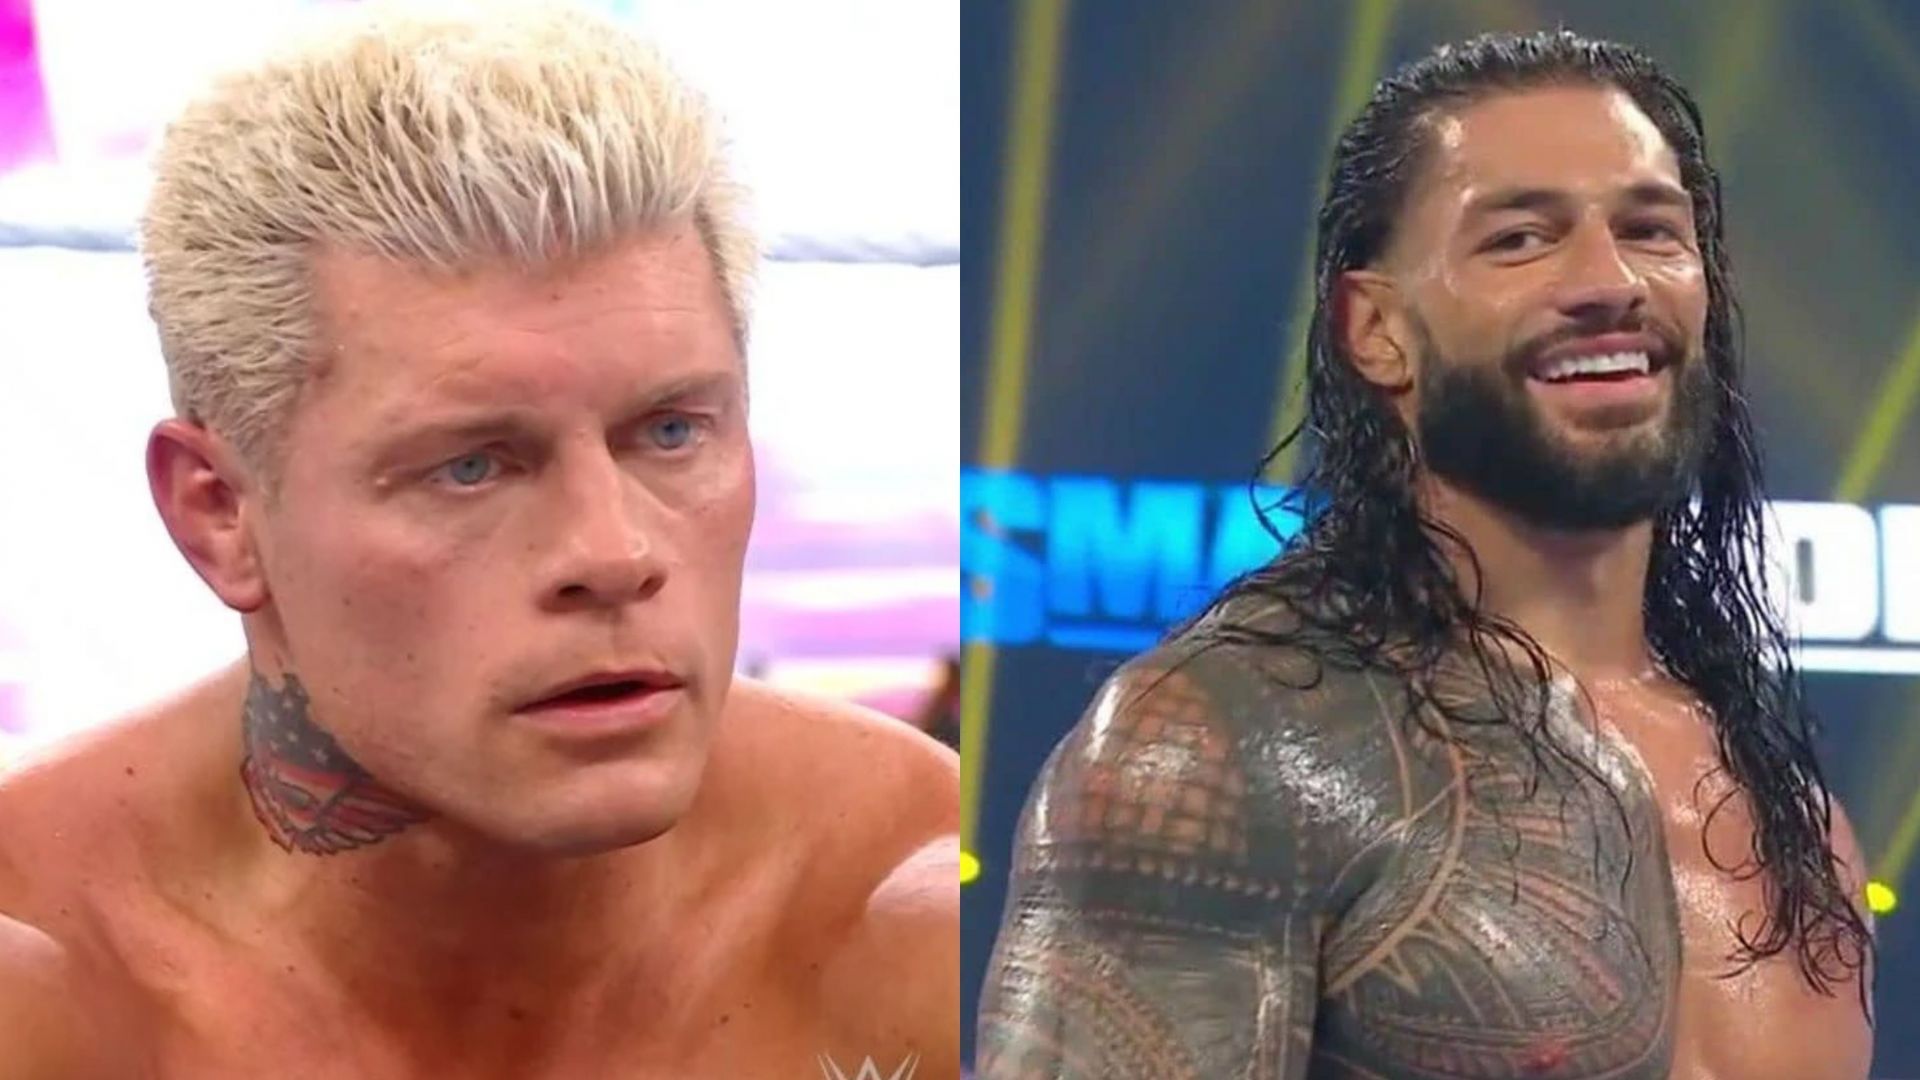 Cody Rhodes (left) and the Undisputed WWE Universal Champion Roman Reigns (right)